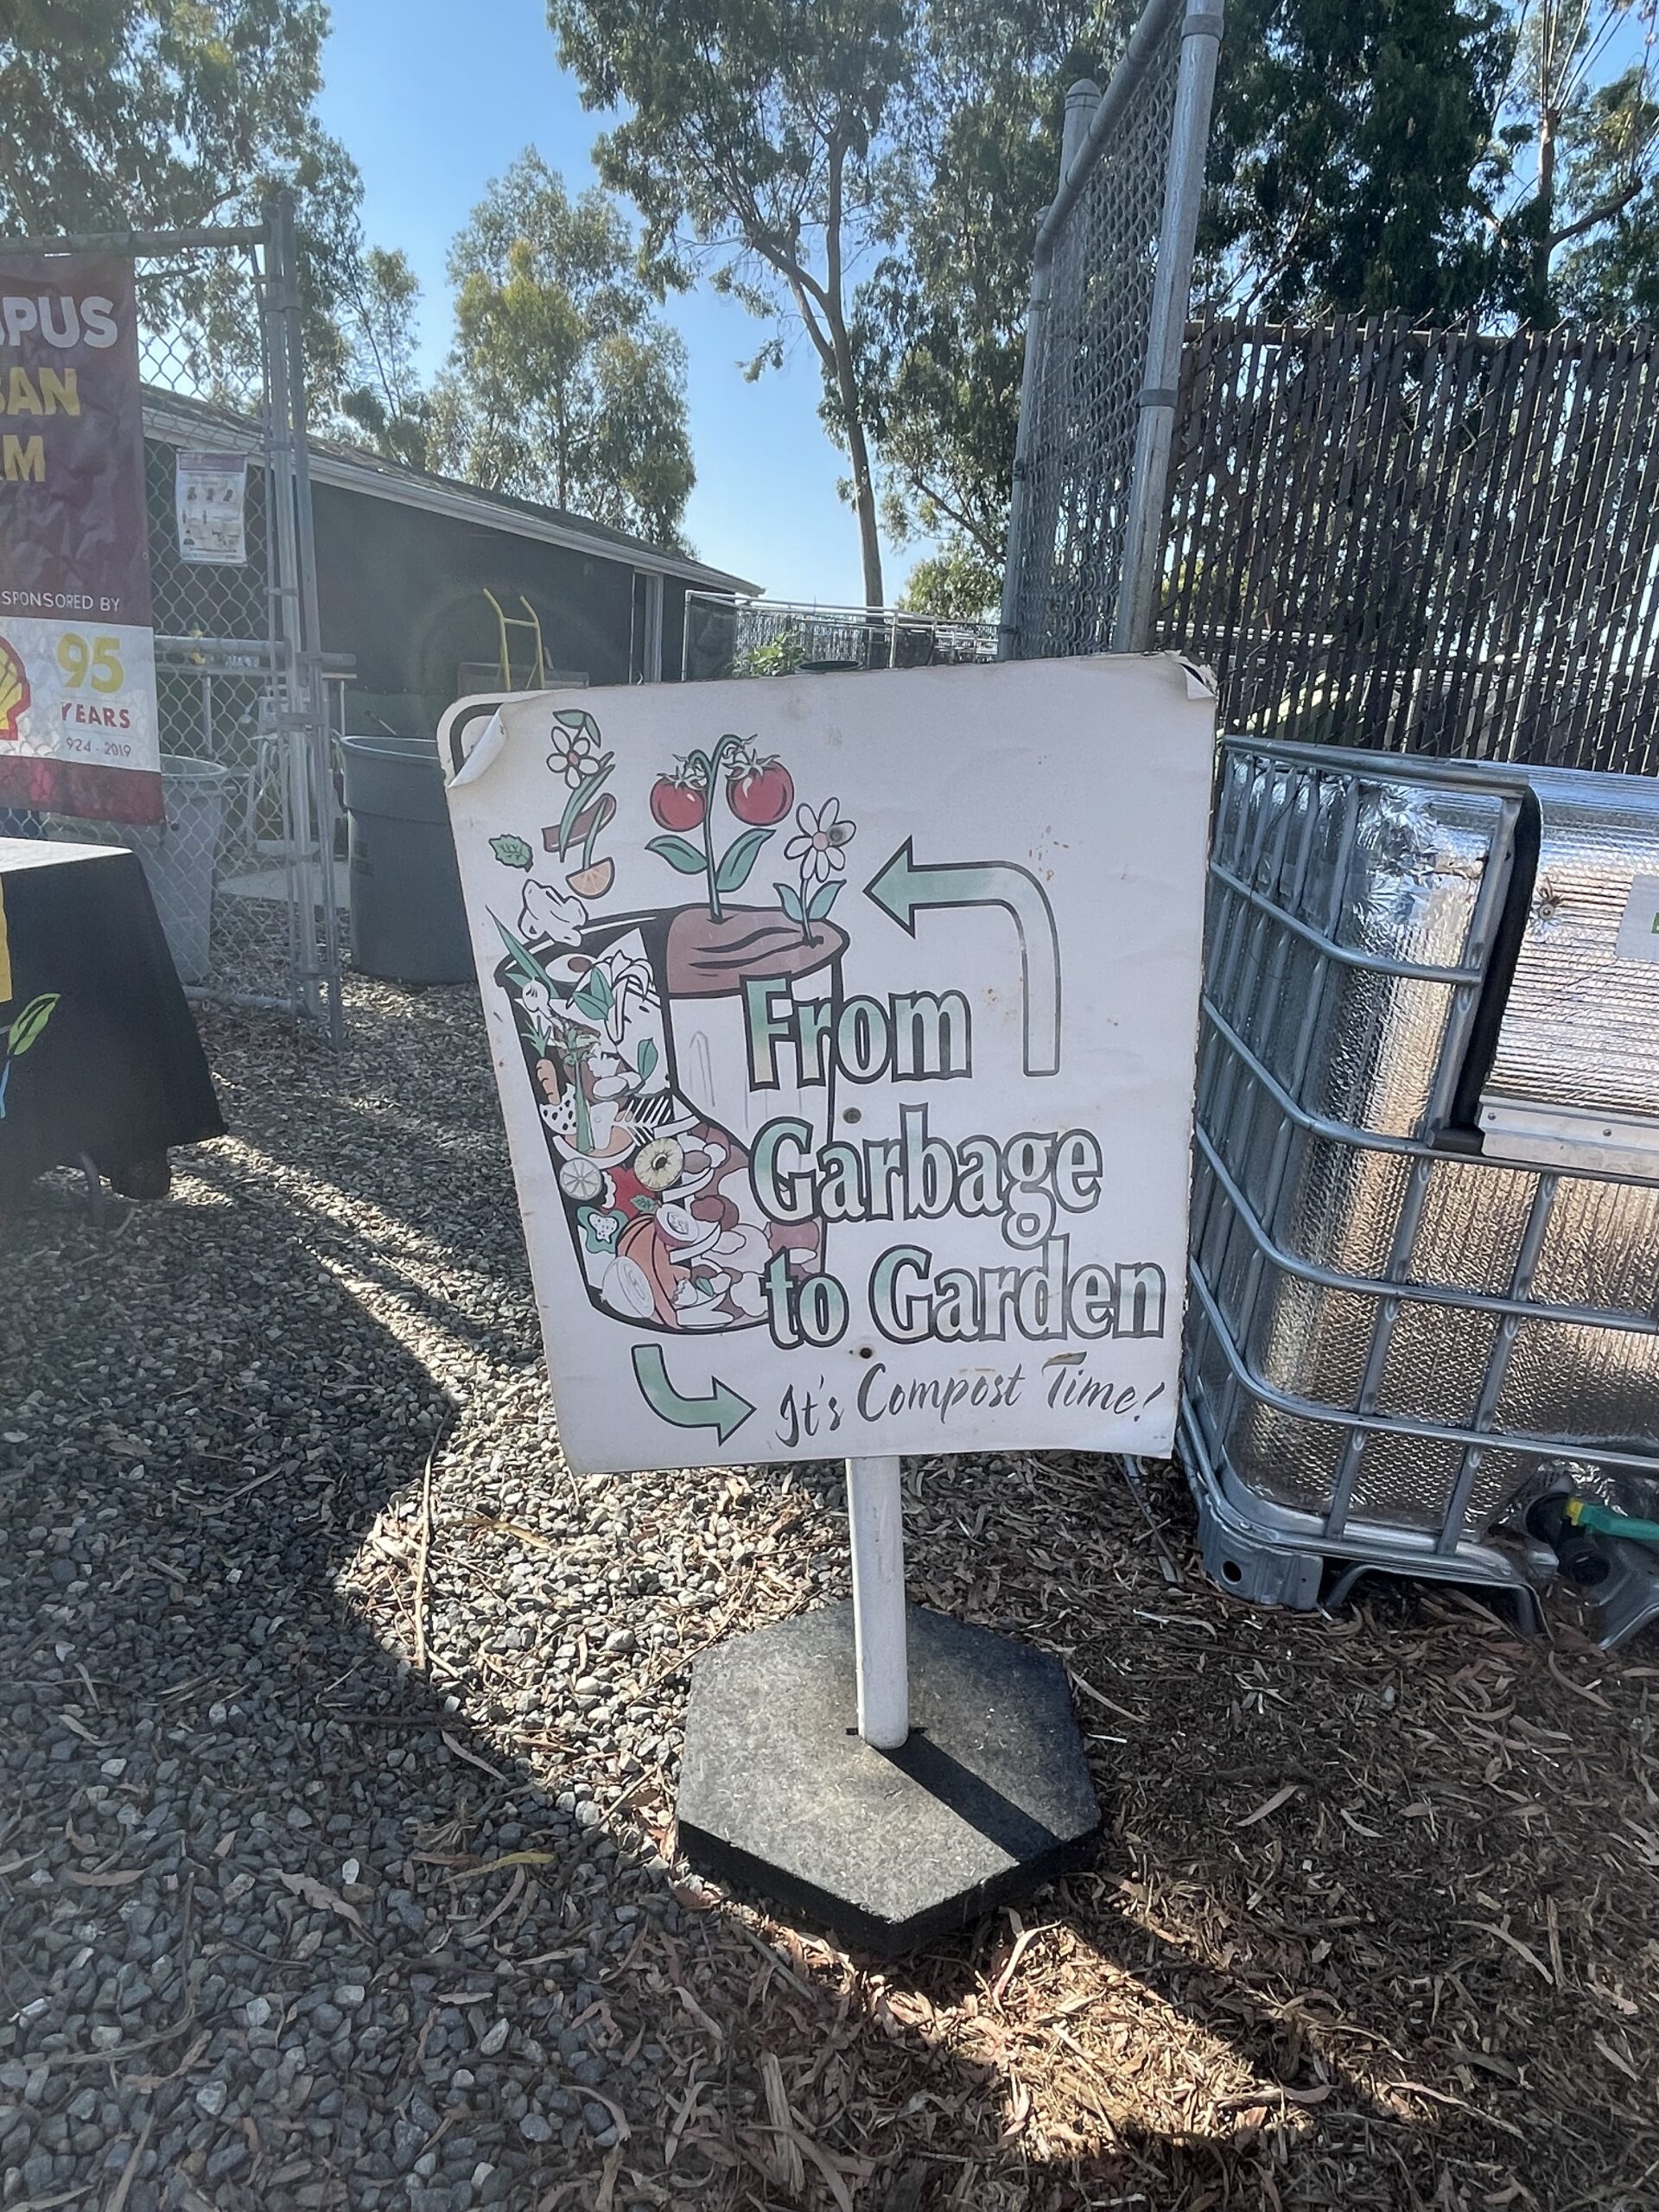 CSUDH ‘s Urban Farm Successfully Reaching For More Sustainable Future